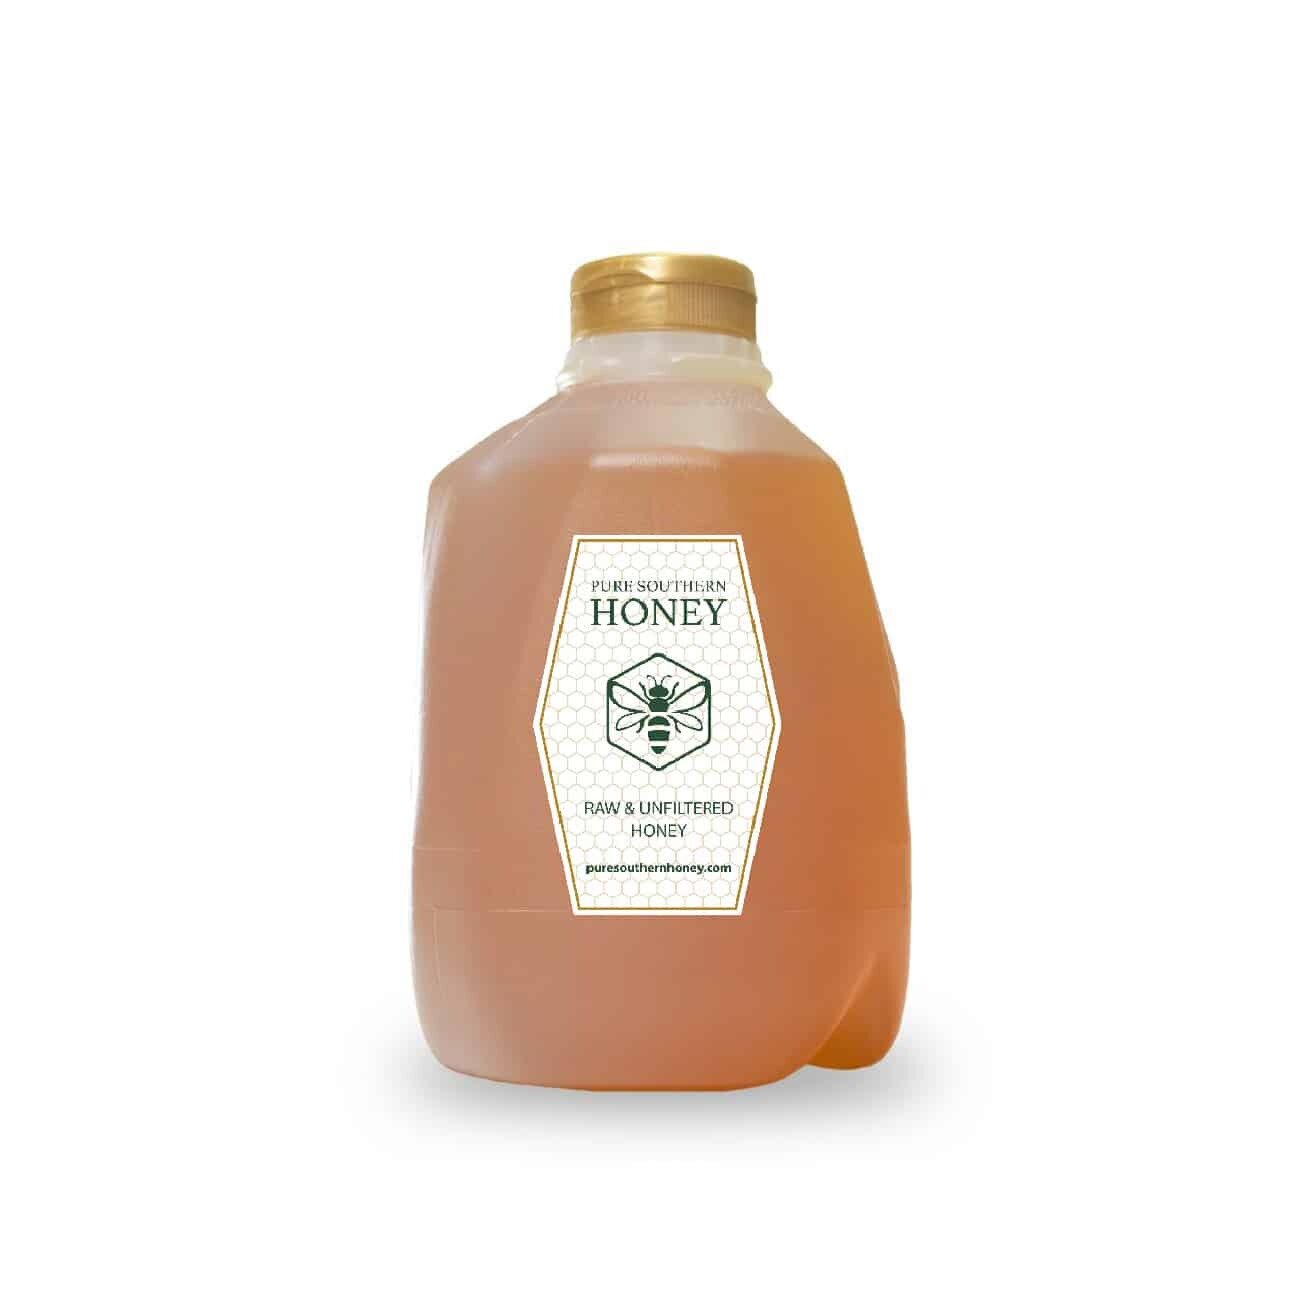 Raw & Unfiltered Honey (Case) - 3lbs